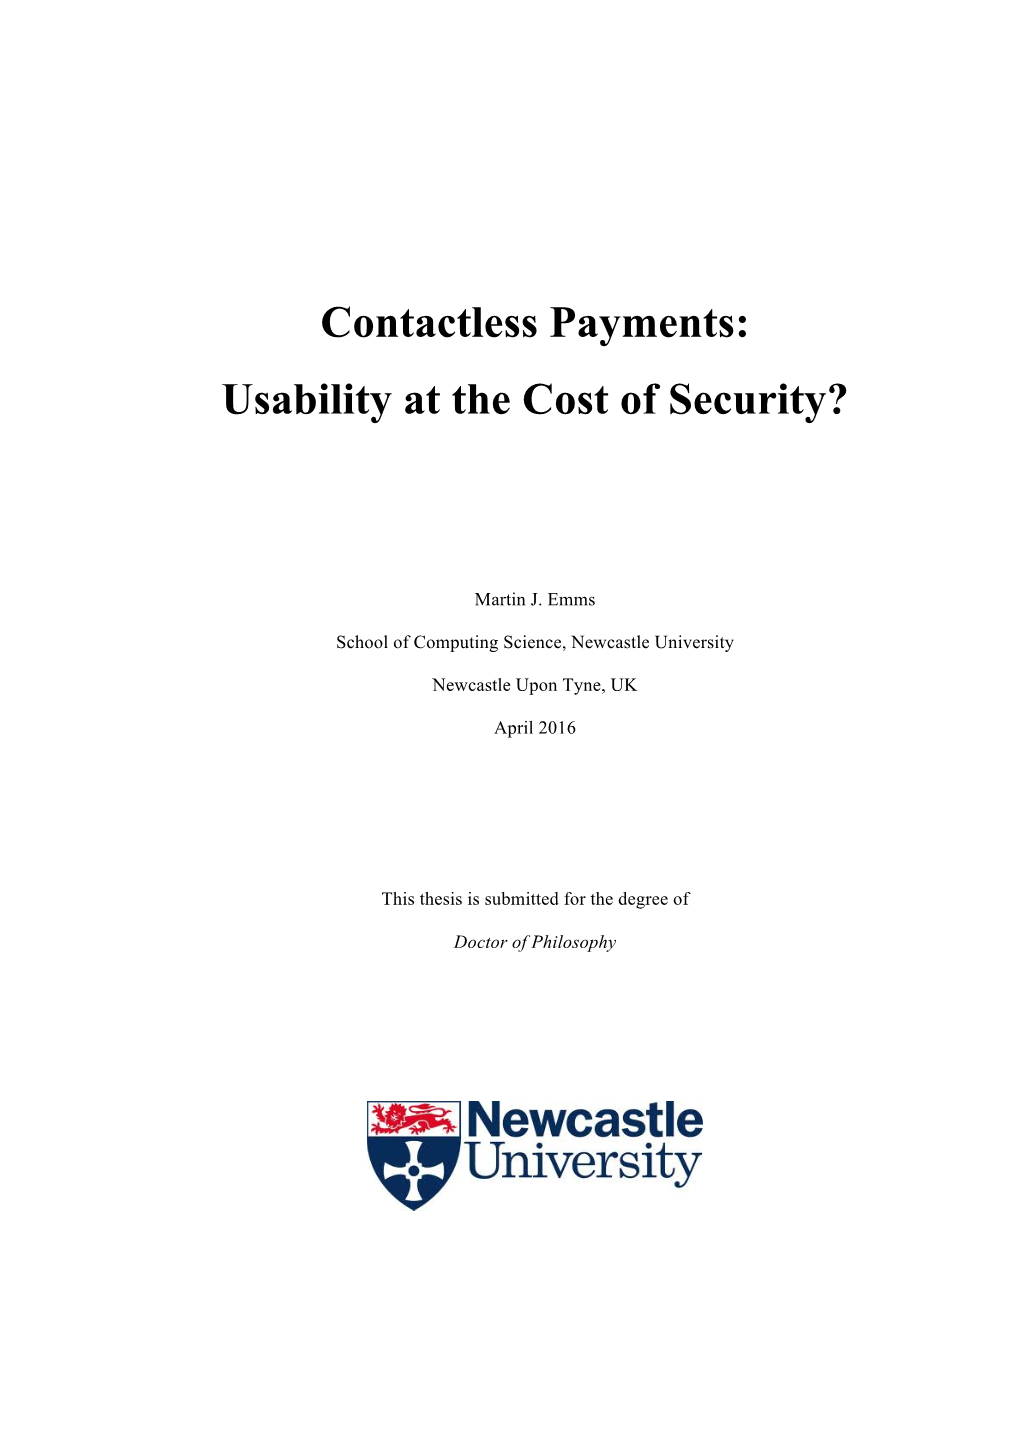 Contactless Payments: Usability at the Cost of Security?